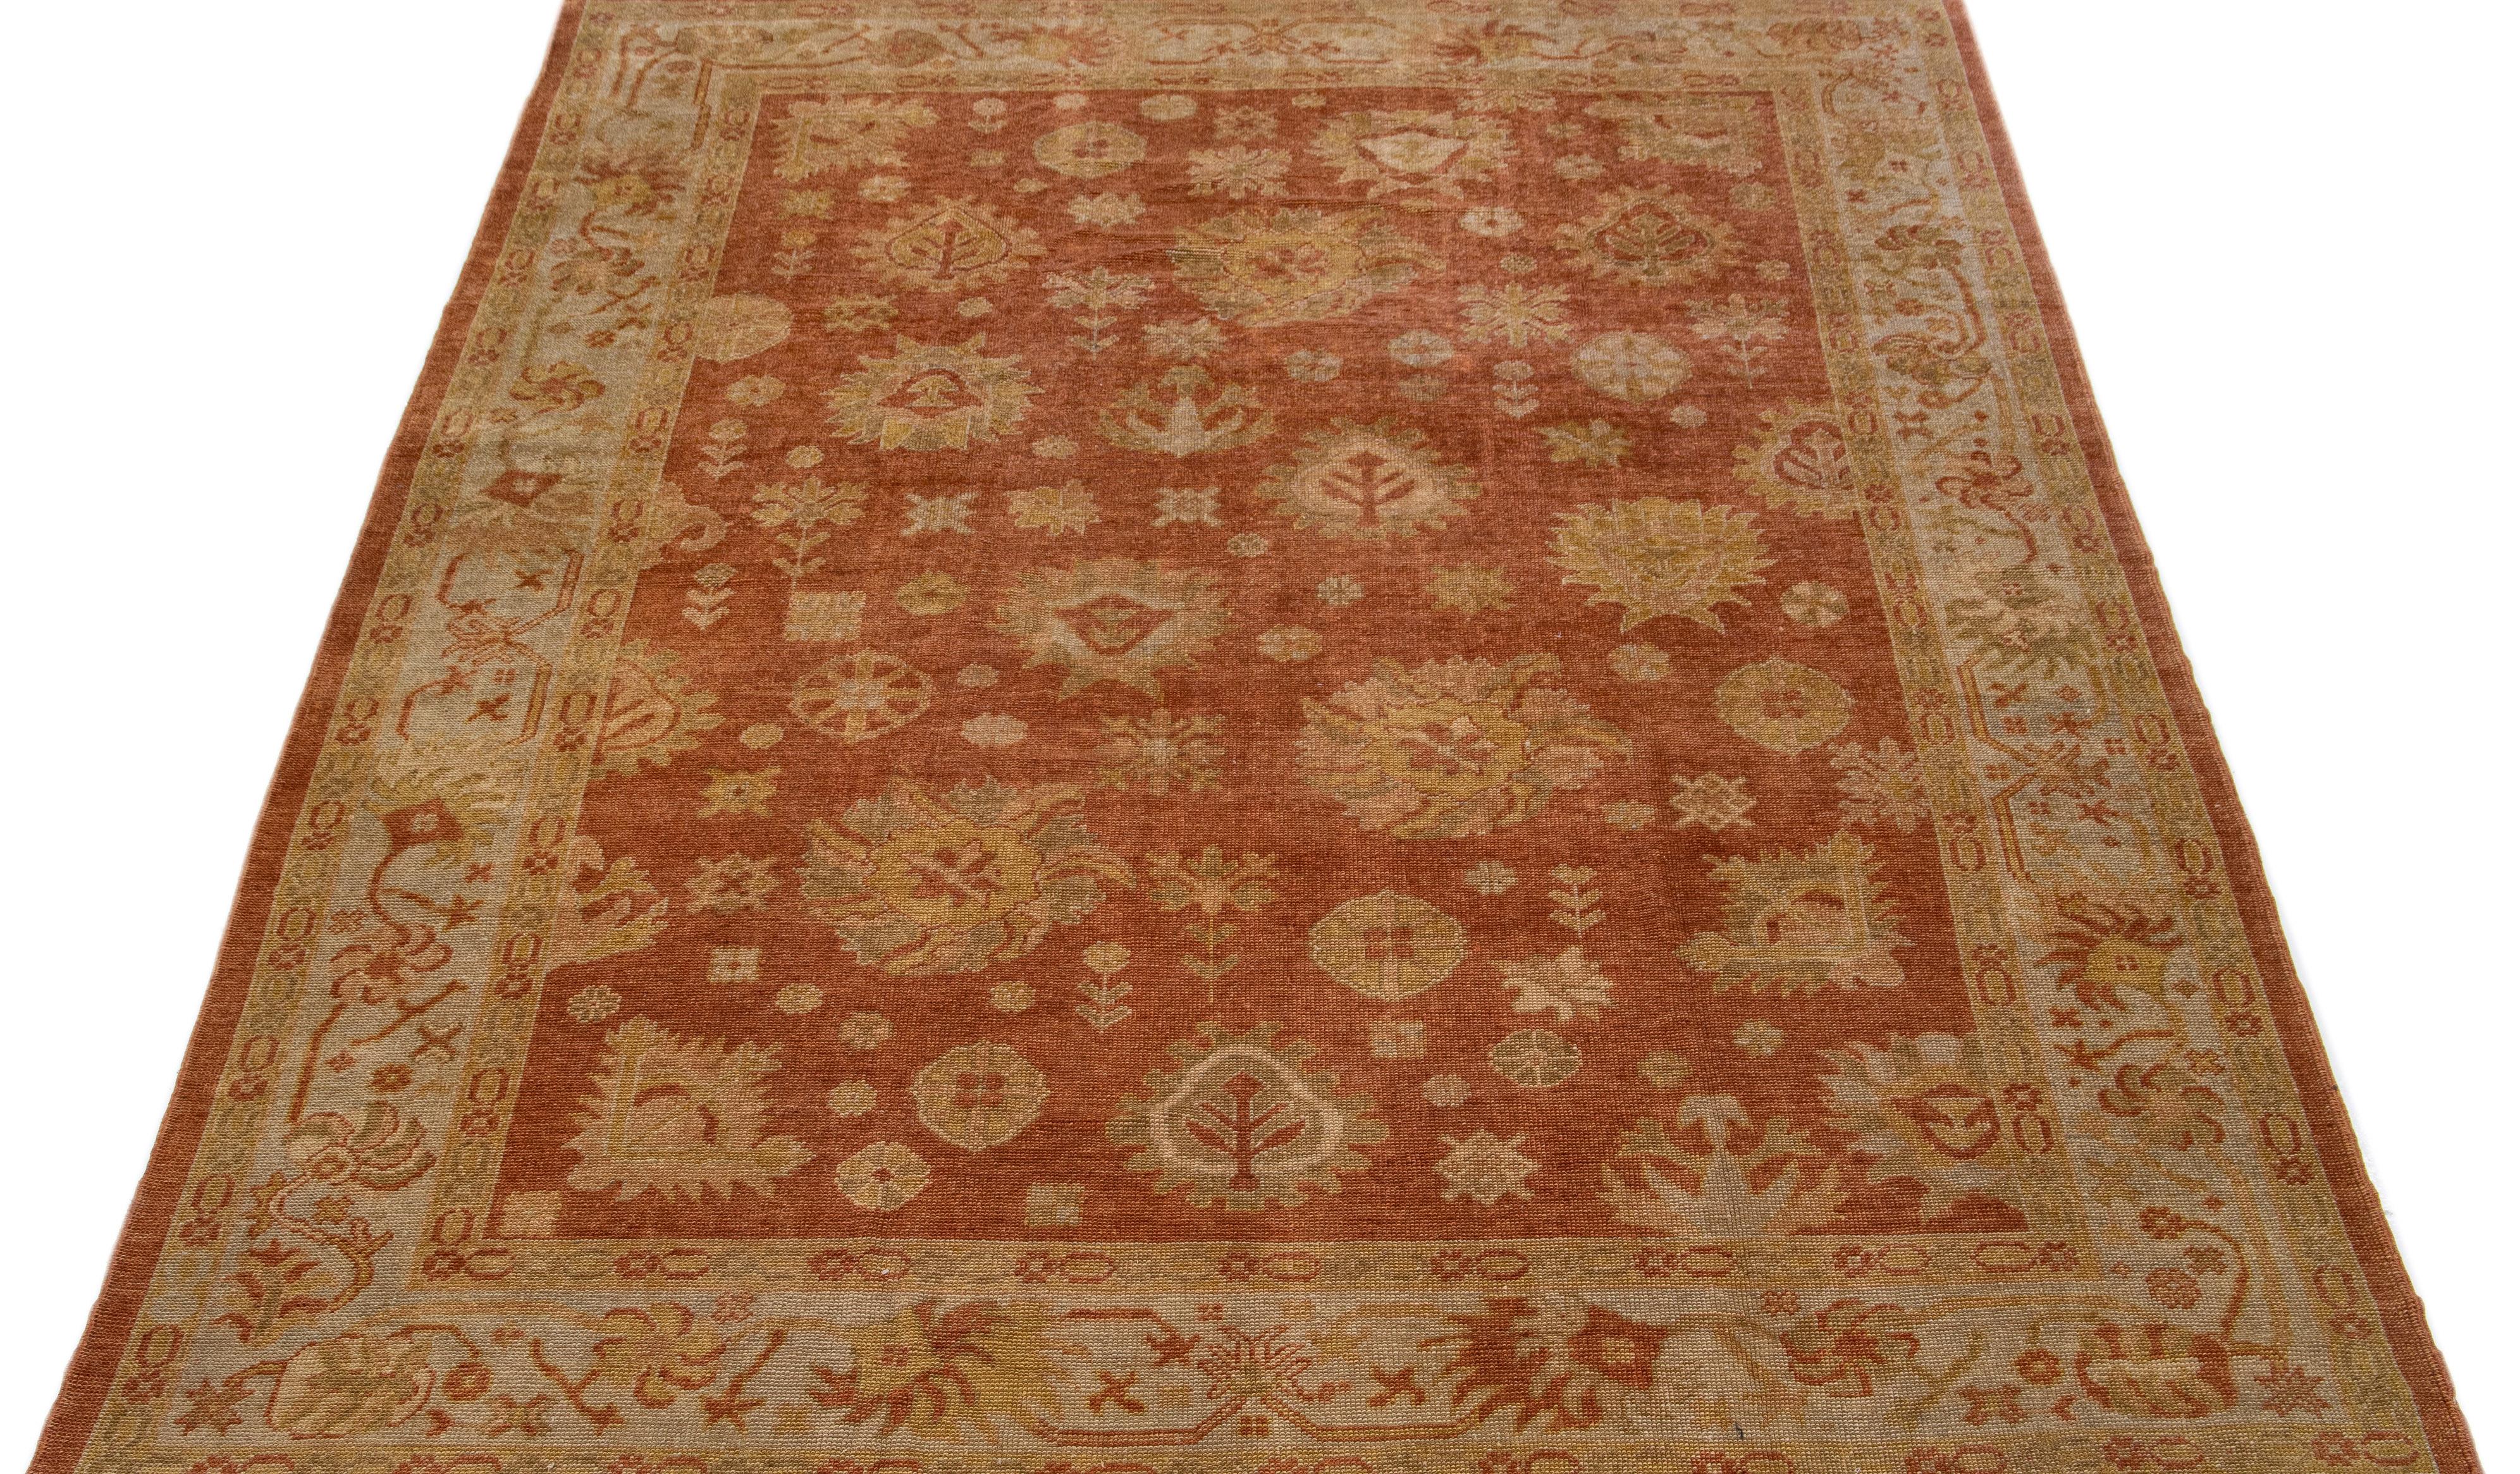 Beautiful Modern Turkish hand-knotted wool rug with a brownish-orange color field. This rug has a gray designed frame with accent colors of green and yellow in a gorgeous all-over geometric floral design.

This rug measures: 9'6